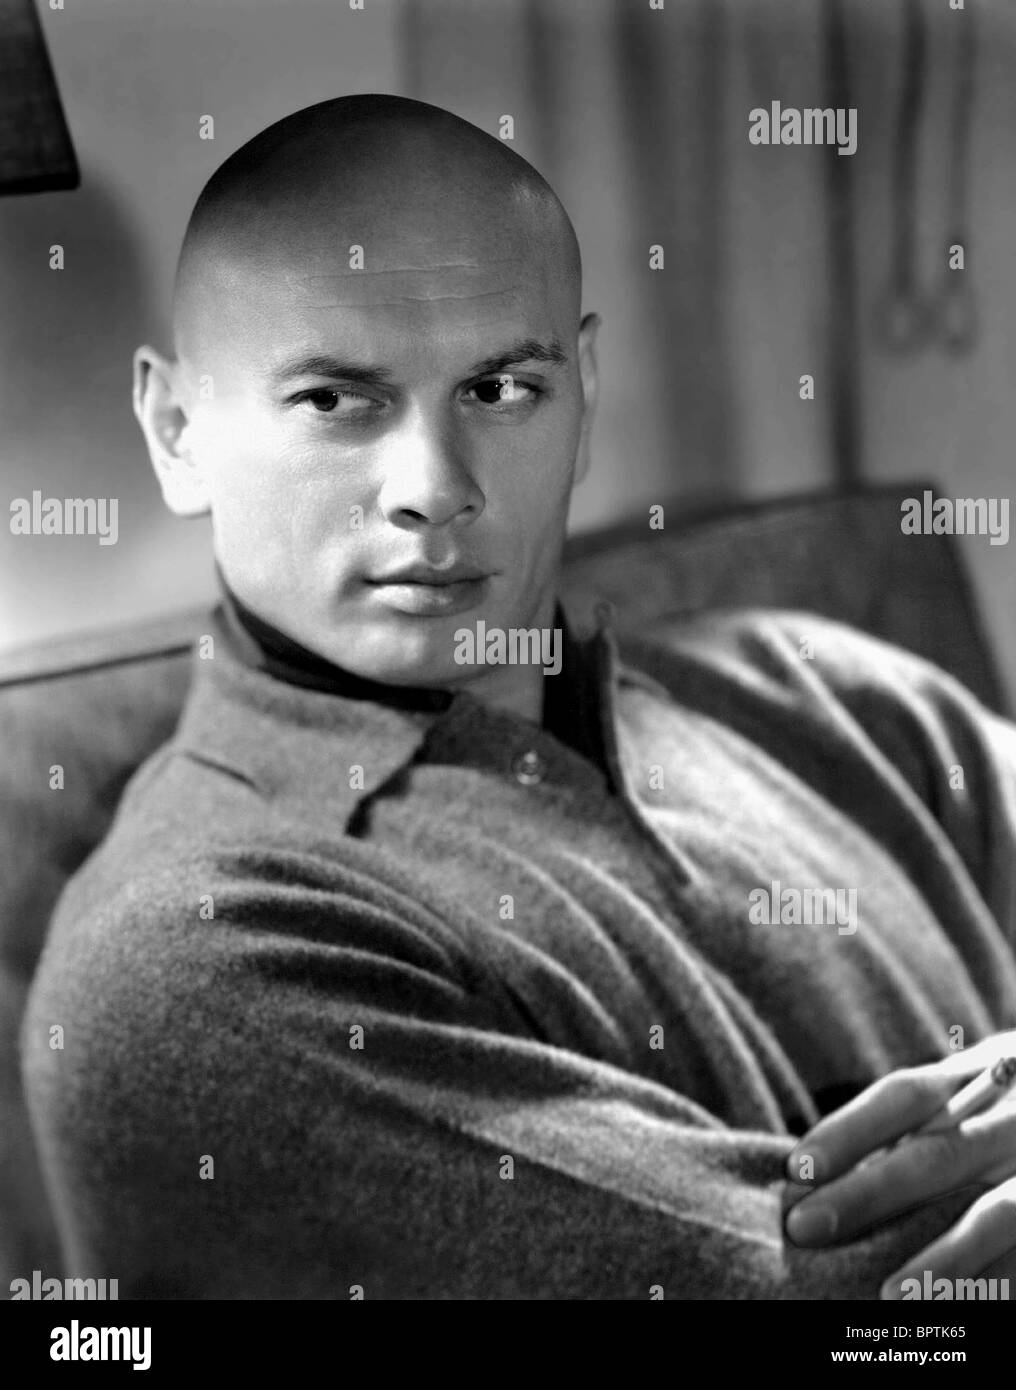 YUL BRYNNER ACTOR (1962) Stock Photo